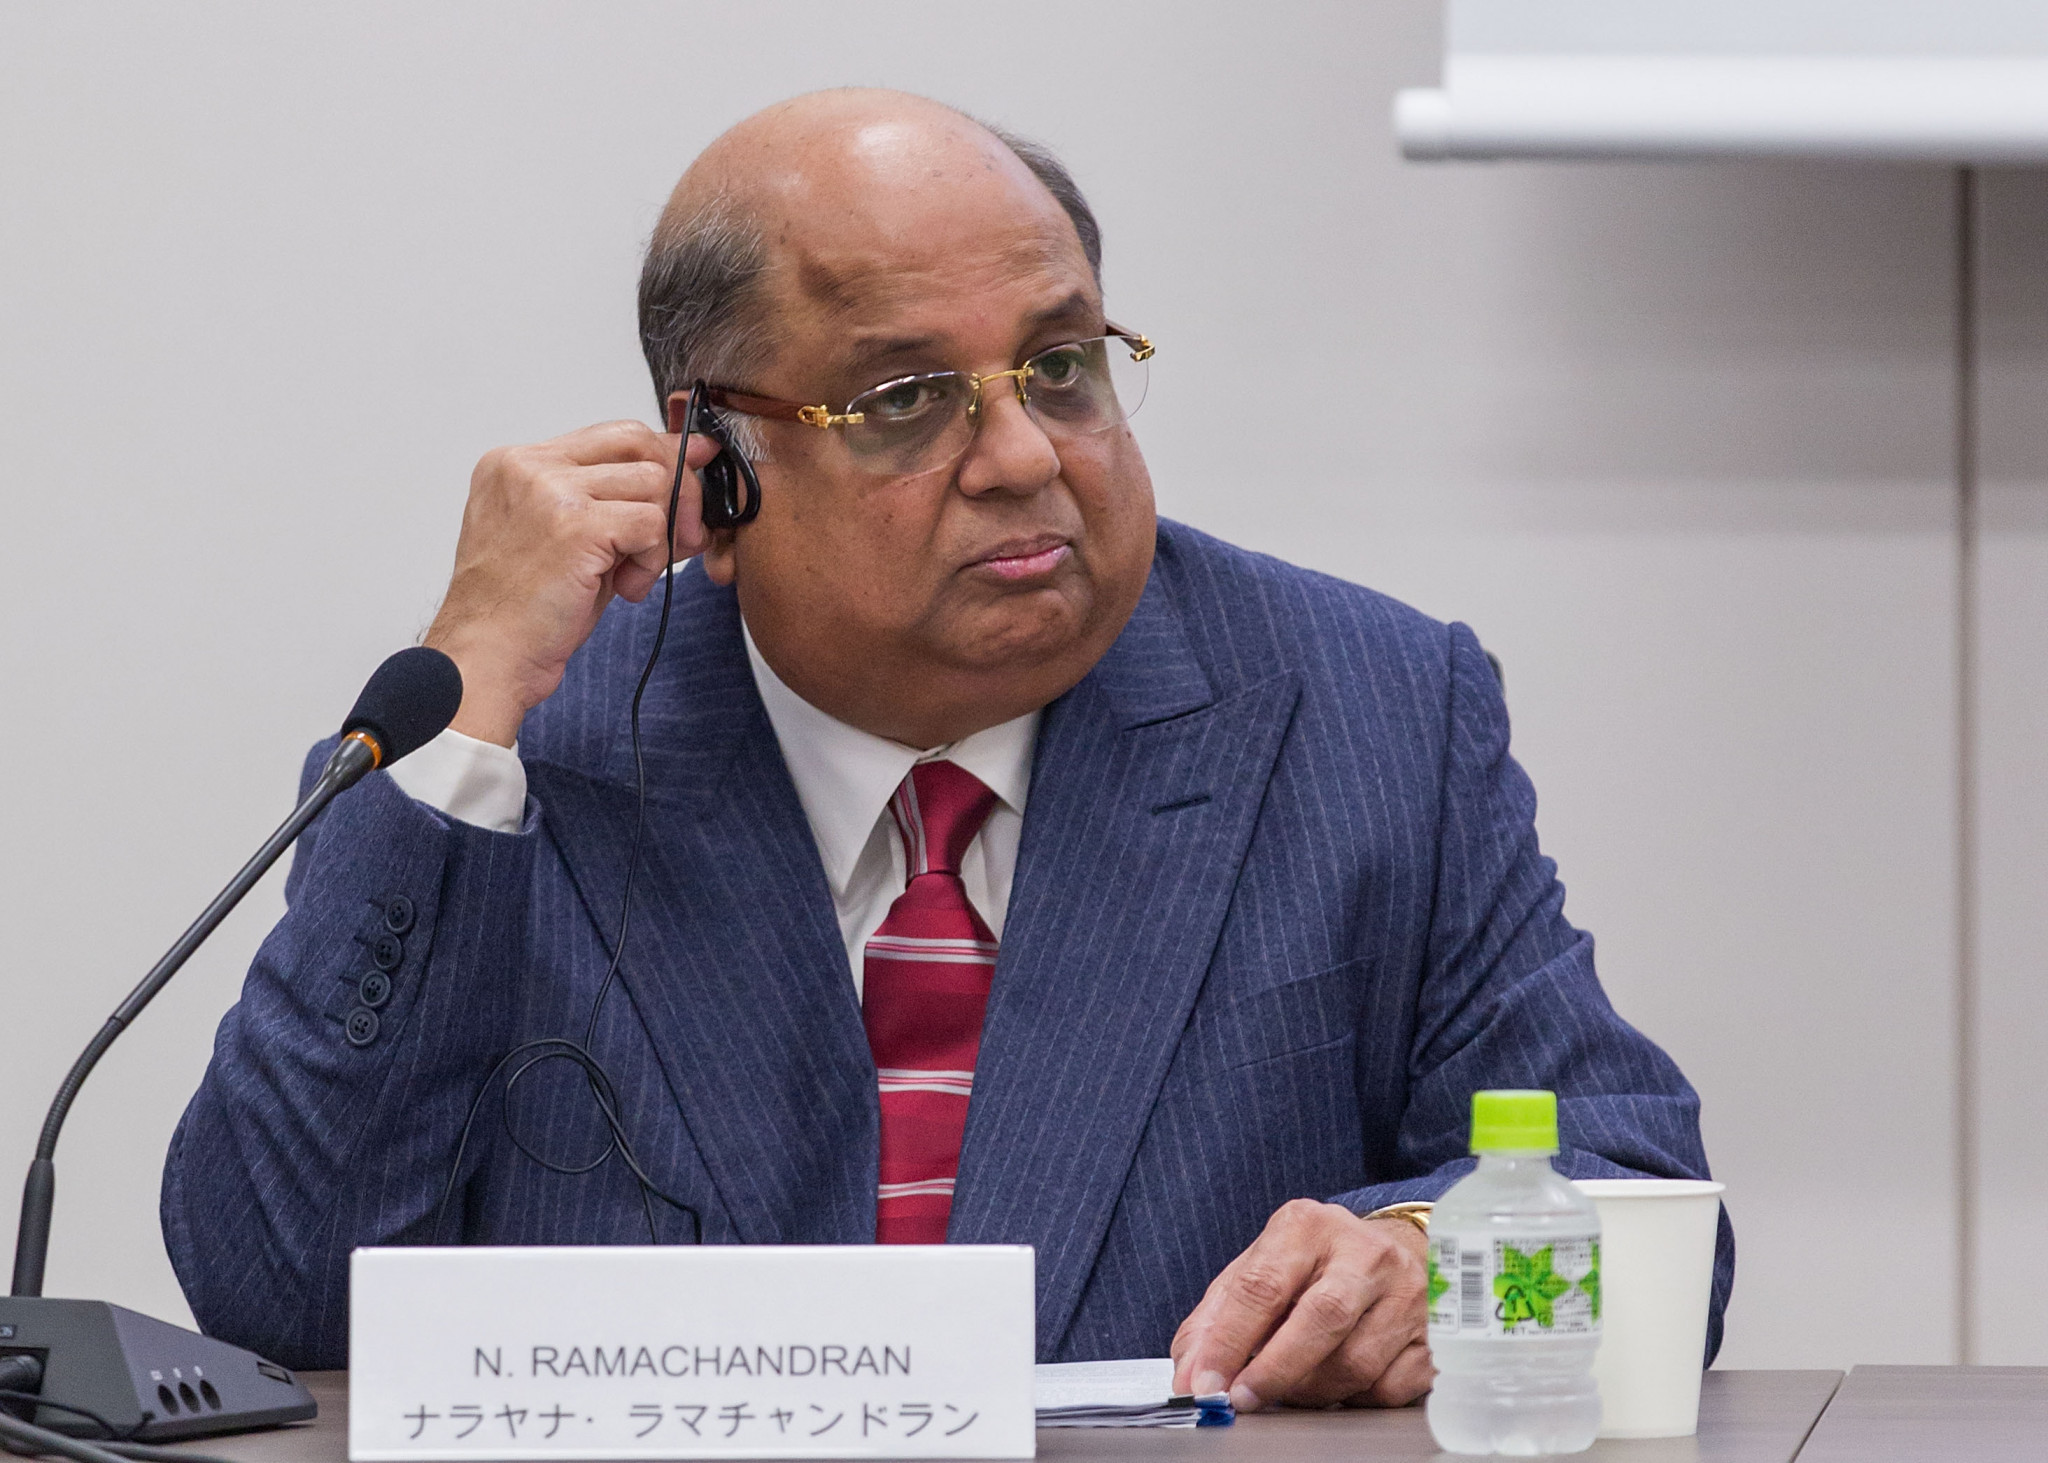 Ramachandran was not present at the meeting today ©Getty Images